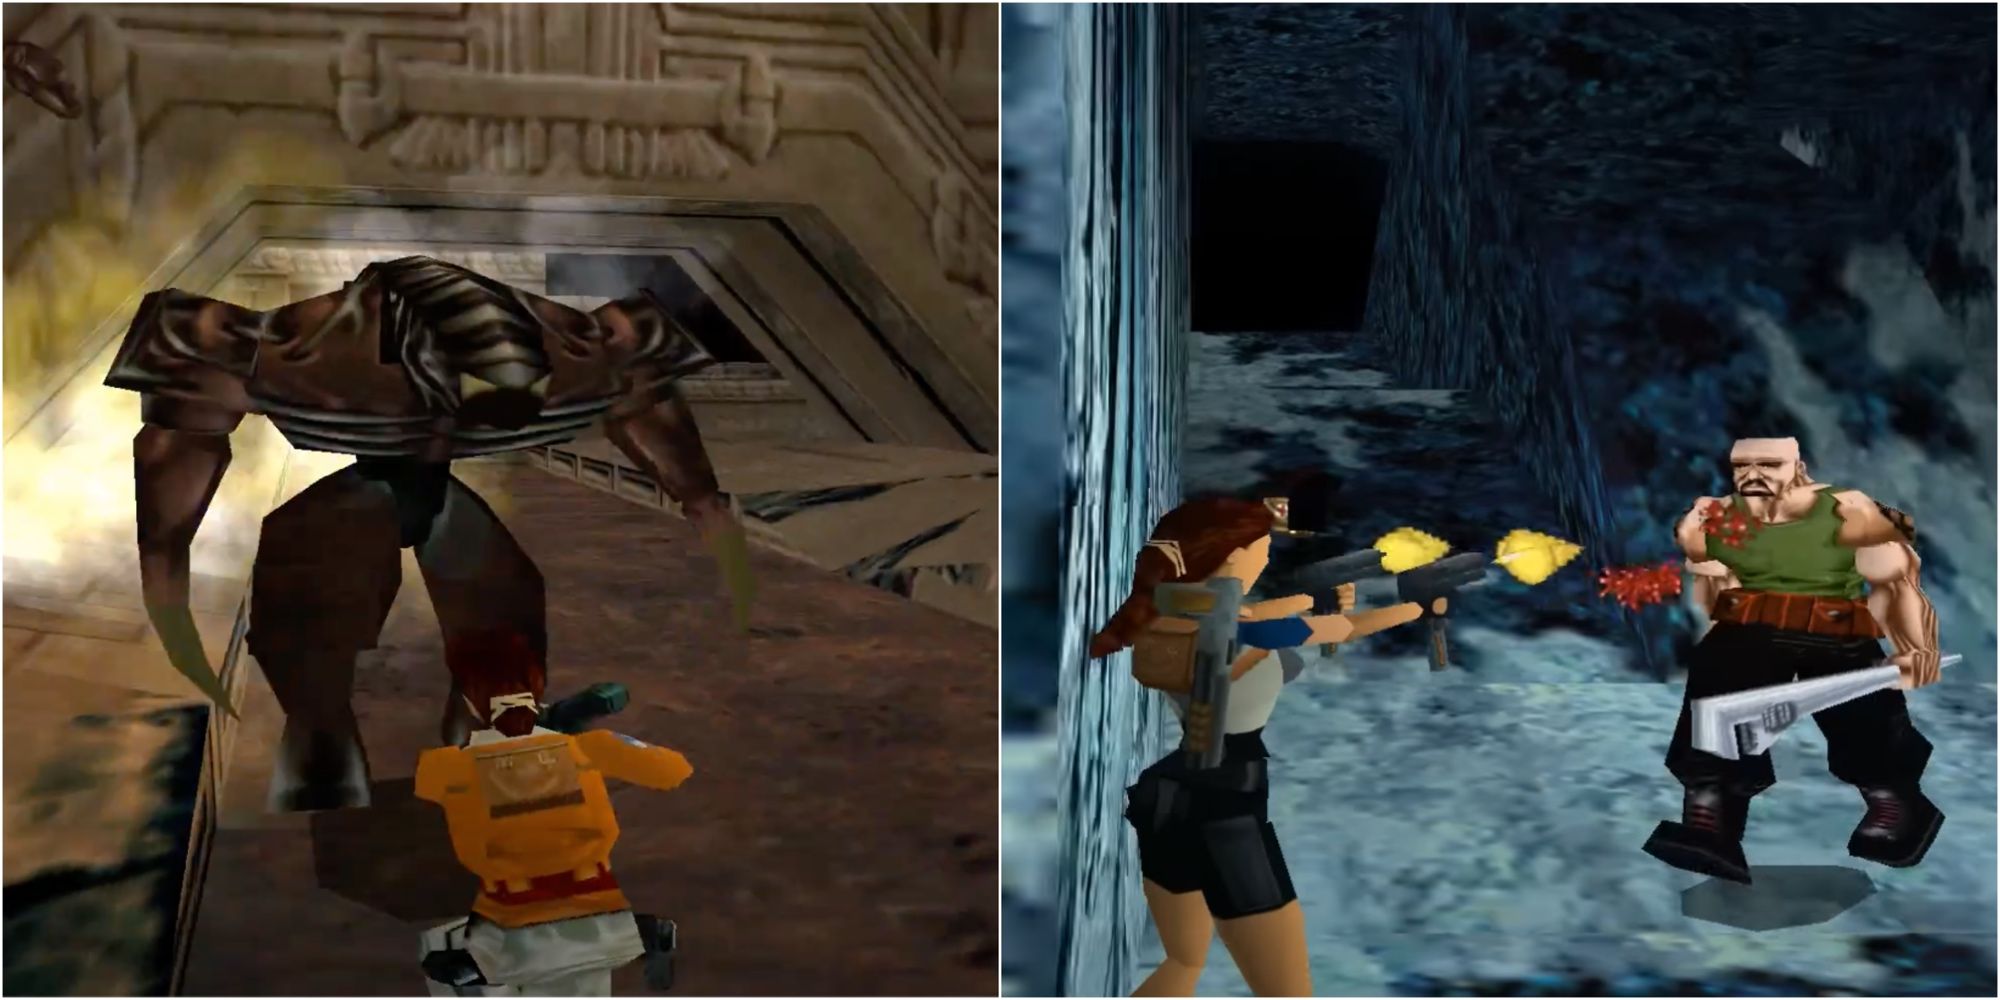 Lara shooting at a mutant and a man with a wrench 